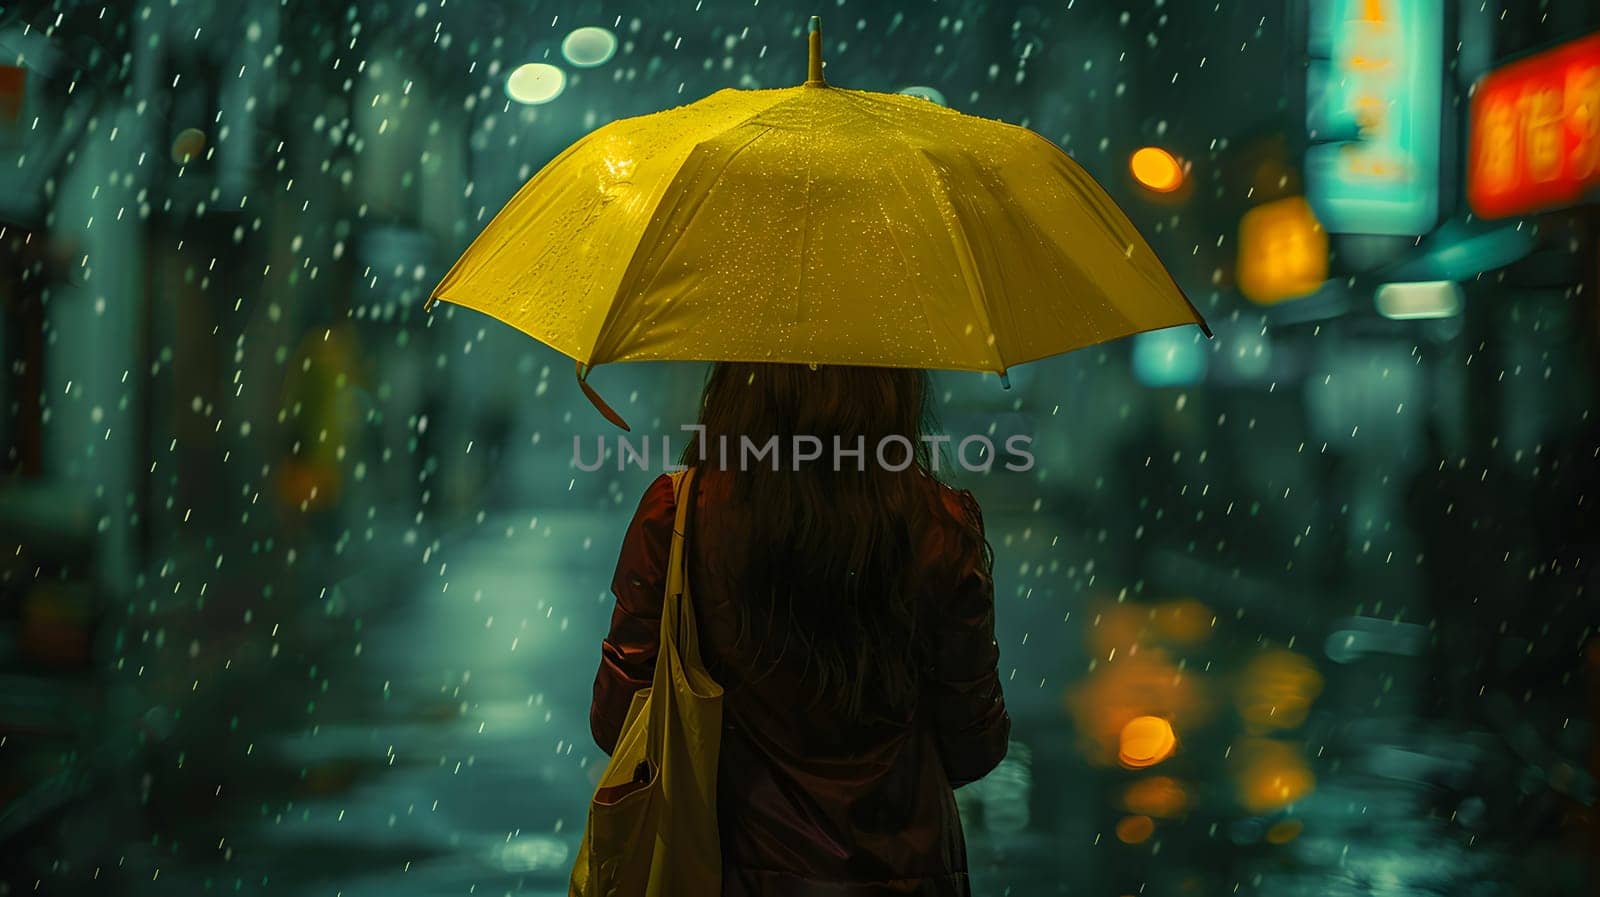 A woman stands under a yellow umbrella in the drizzle, embracing the natural environment and the atmospheric phenomenon of rain while traveling in the darkness